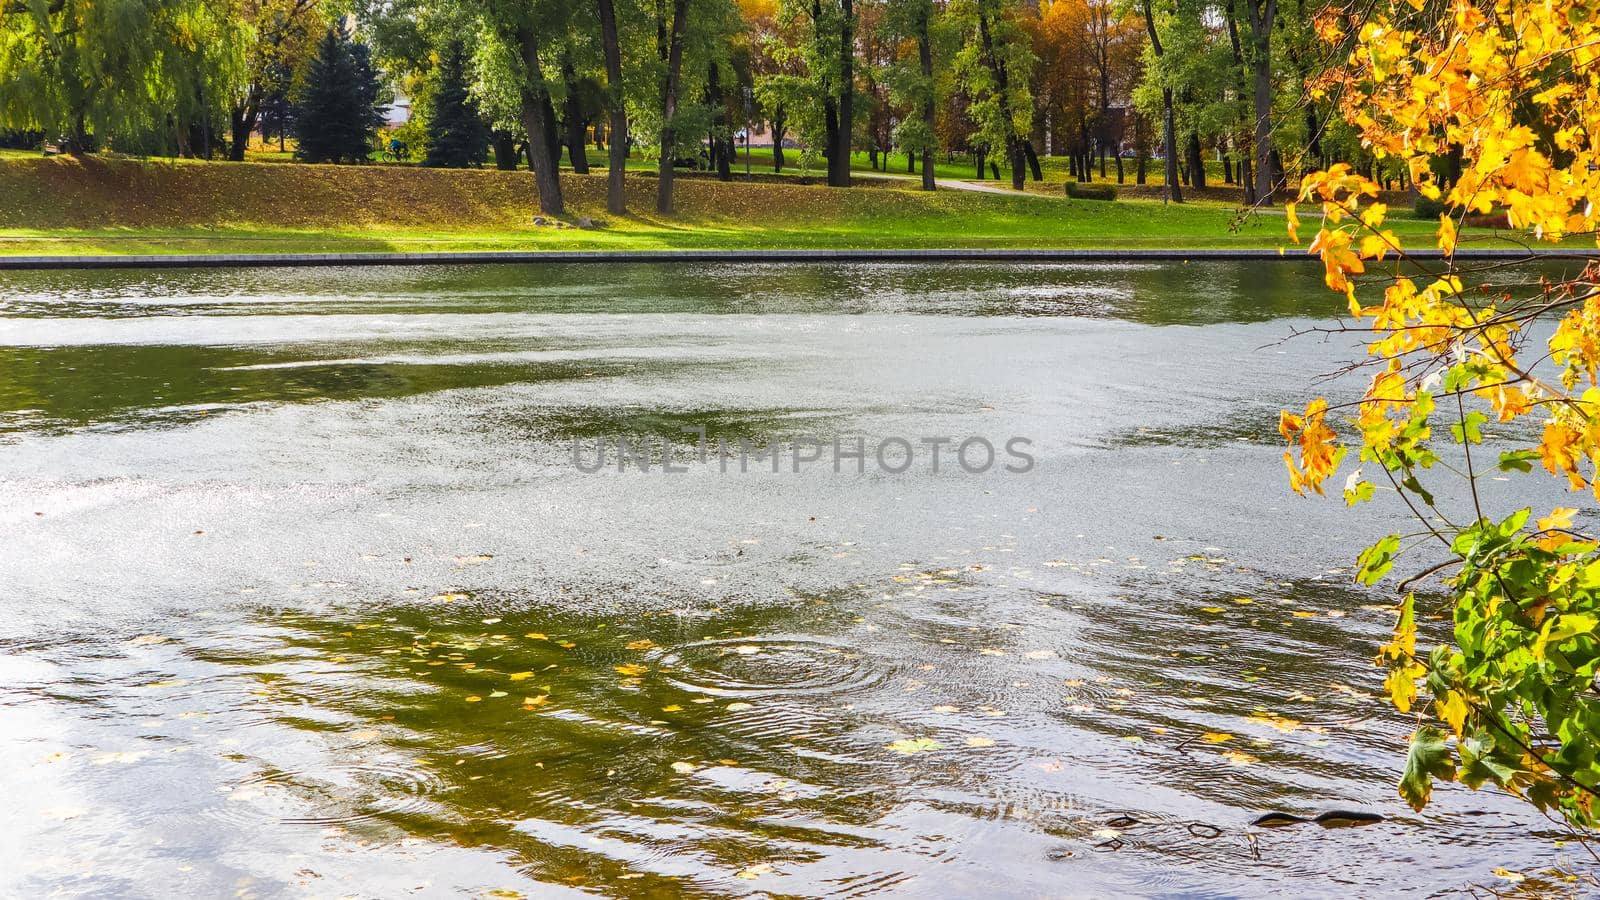 Beautiful autumn park with a lake and fallen yellow leaves in the water